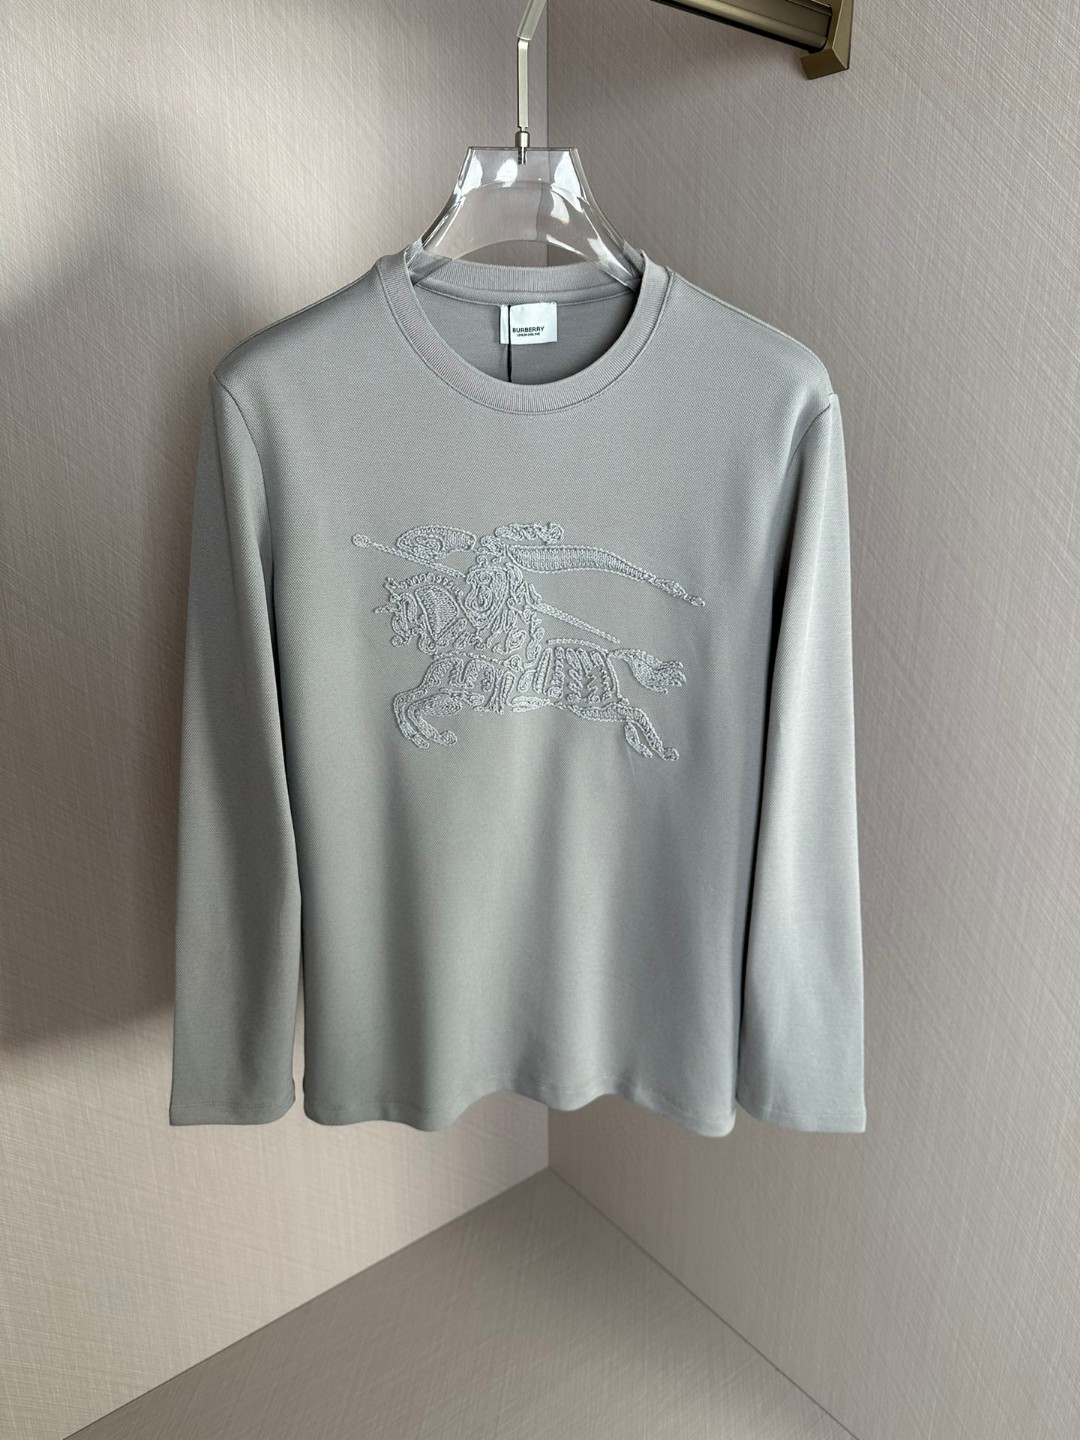 Burberry Clothing T-Shirt Embroidery Unisex Cotton Mercerized Spring/Summer Collection Fashion Long Sleeve